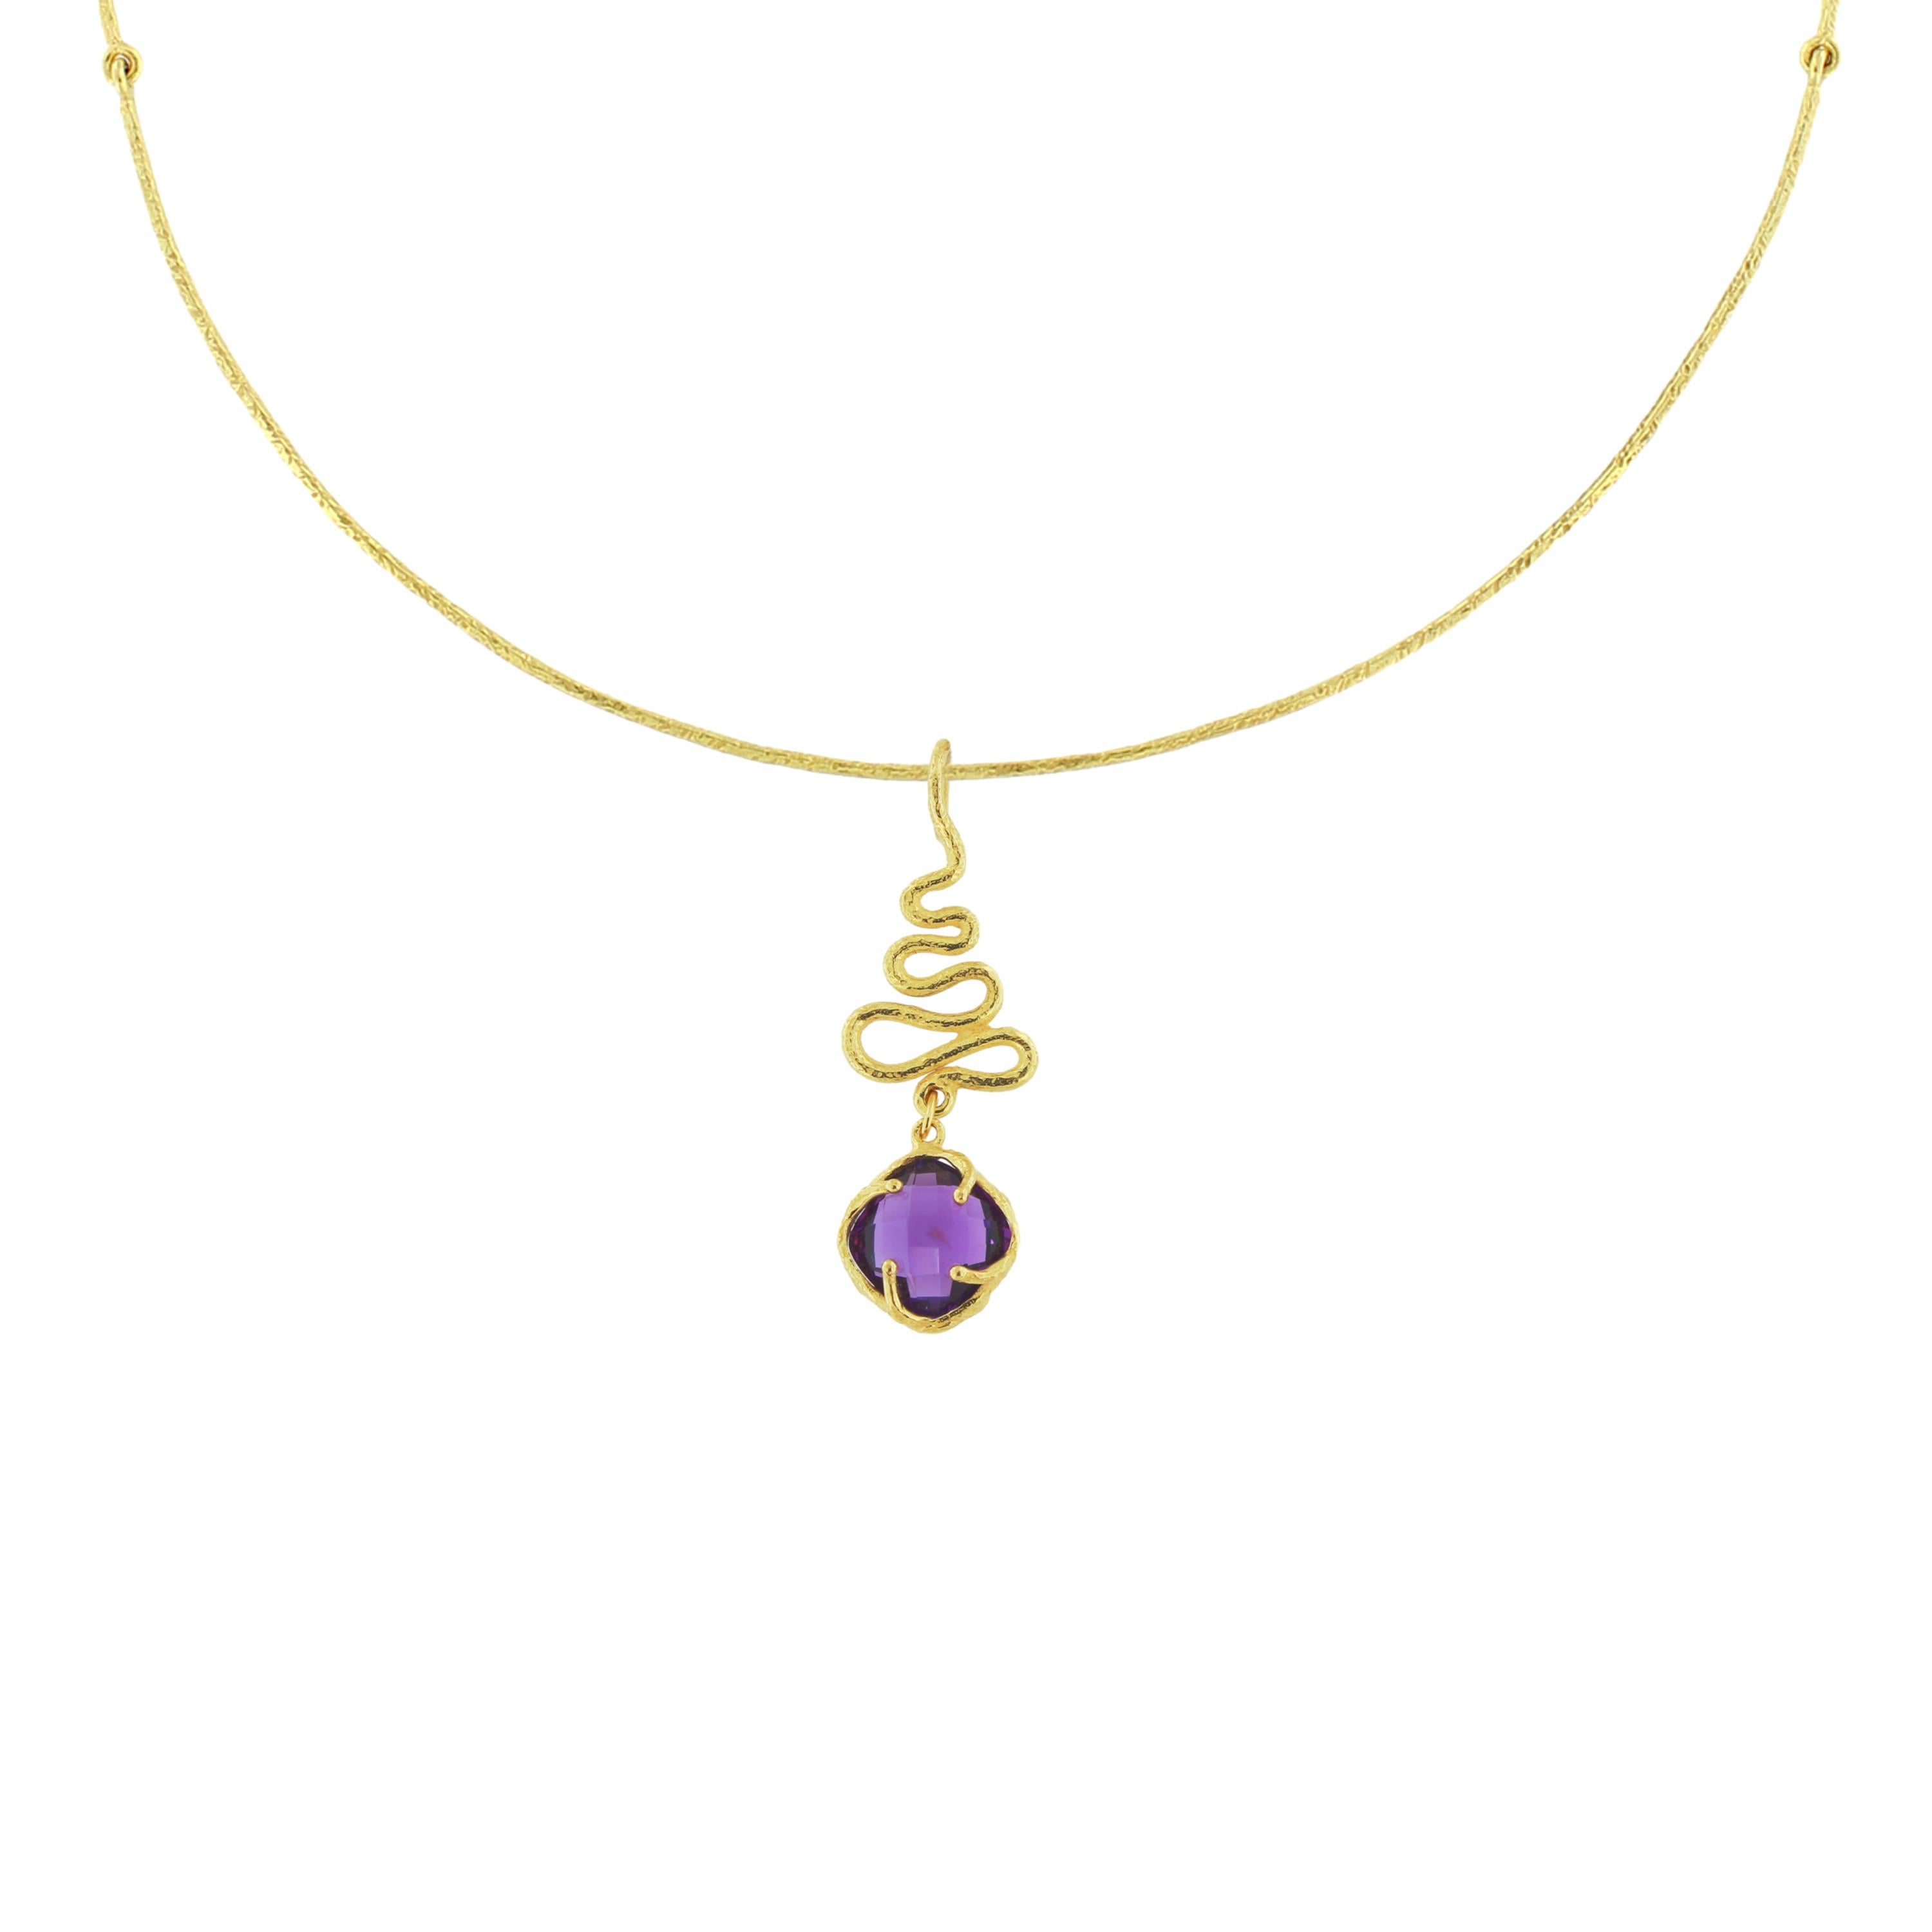 Exquisite Purple Amethyst Gemstone Satin Yellow Gold Pendant, from Sacchi's 